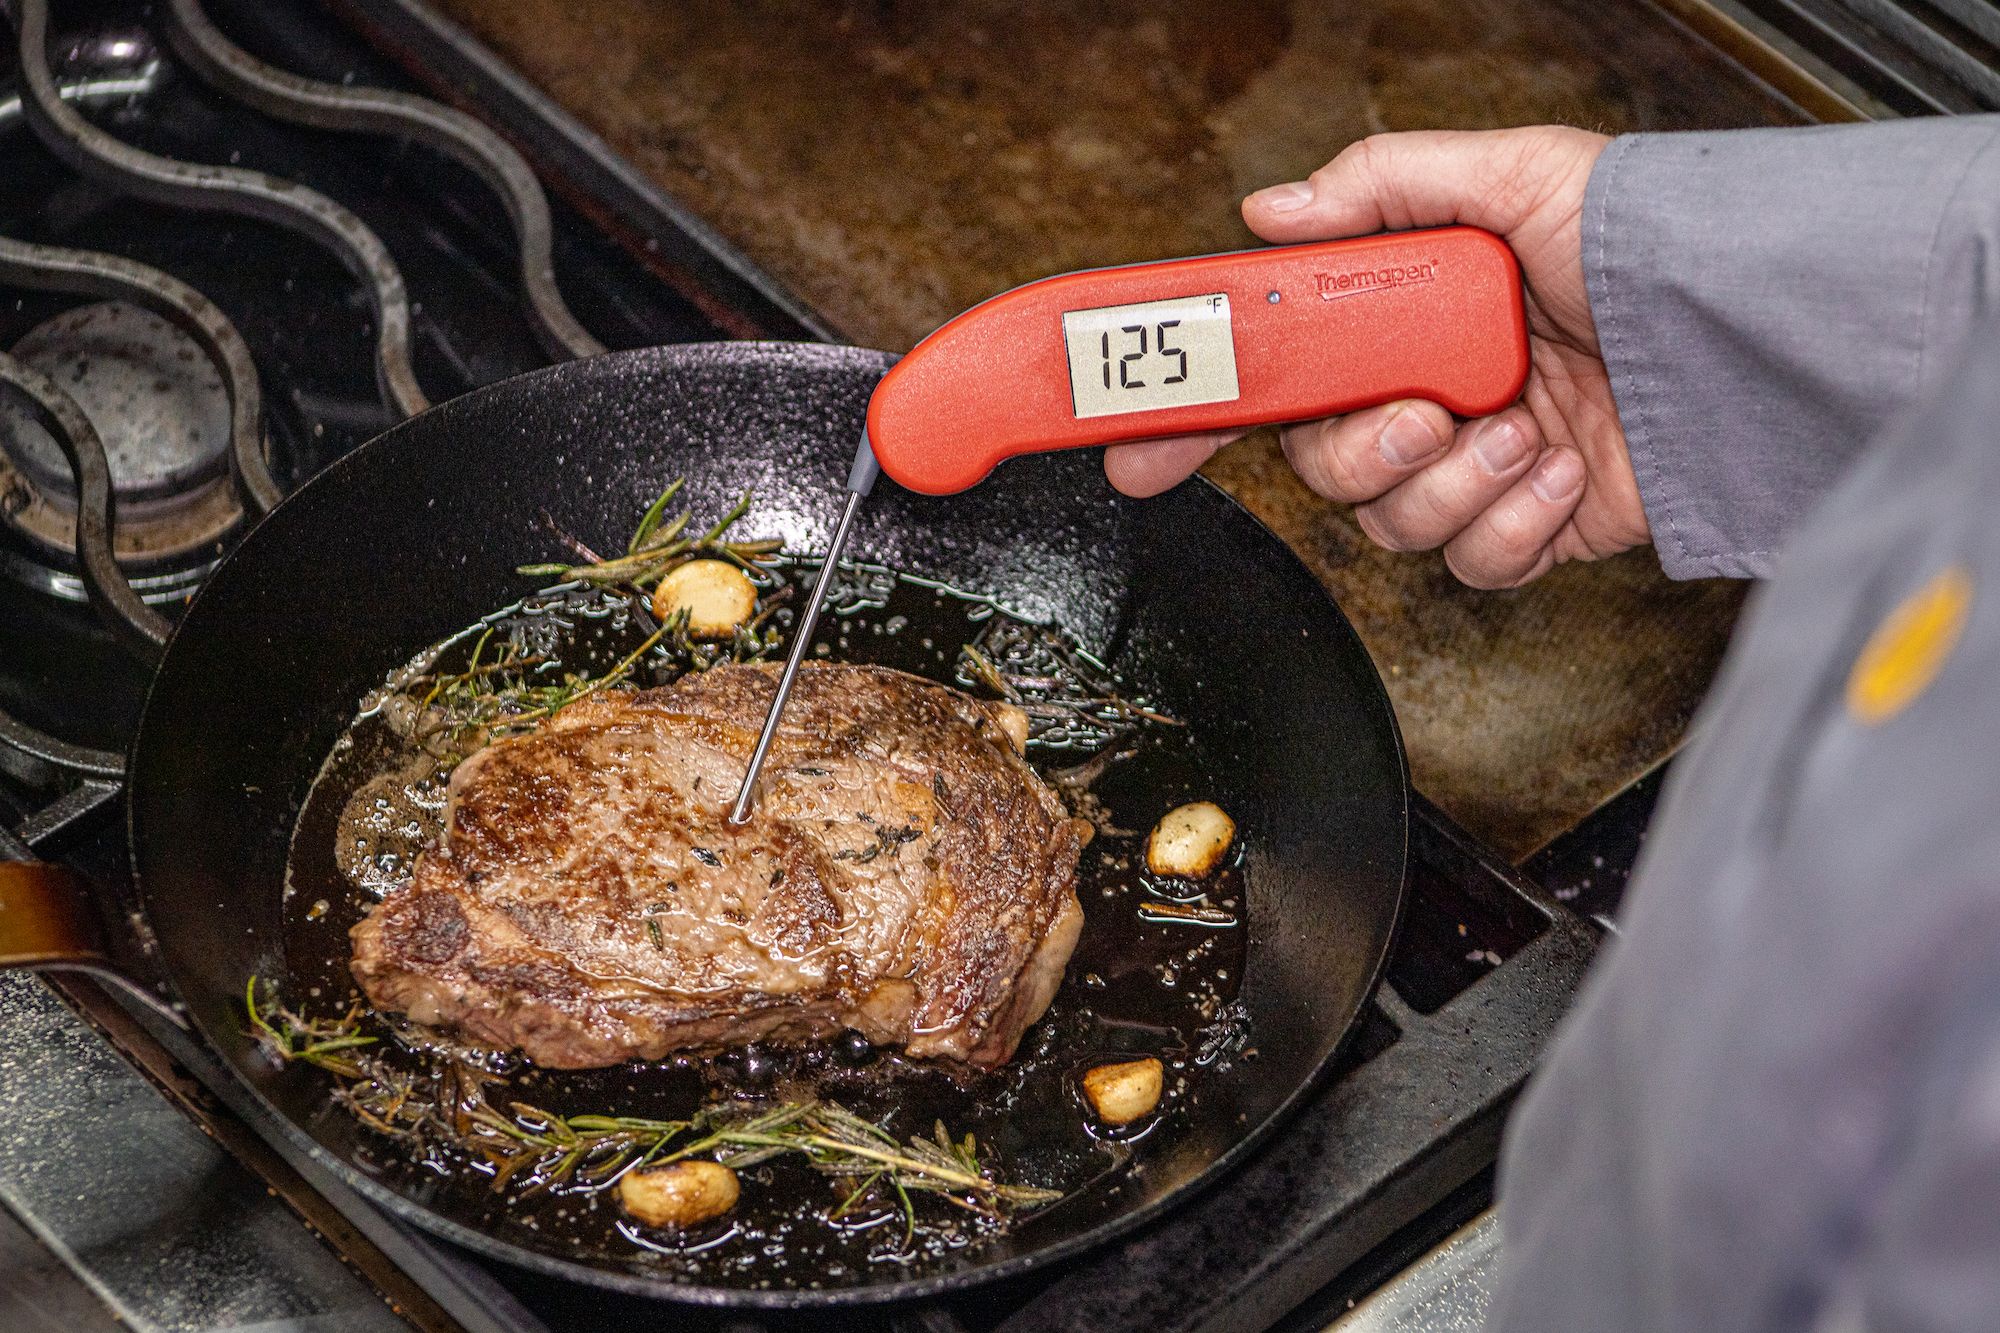 ThermoWorks Released Its New Thermapen One Cooking Thermometer